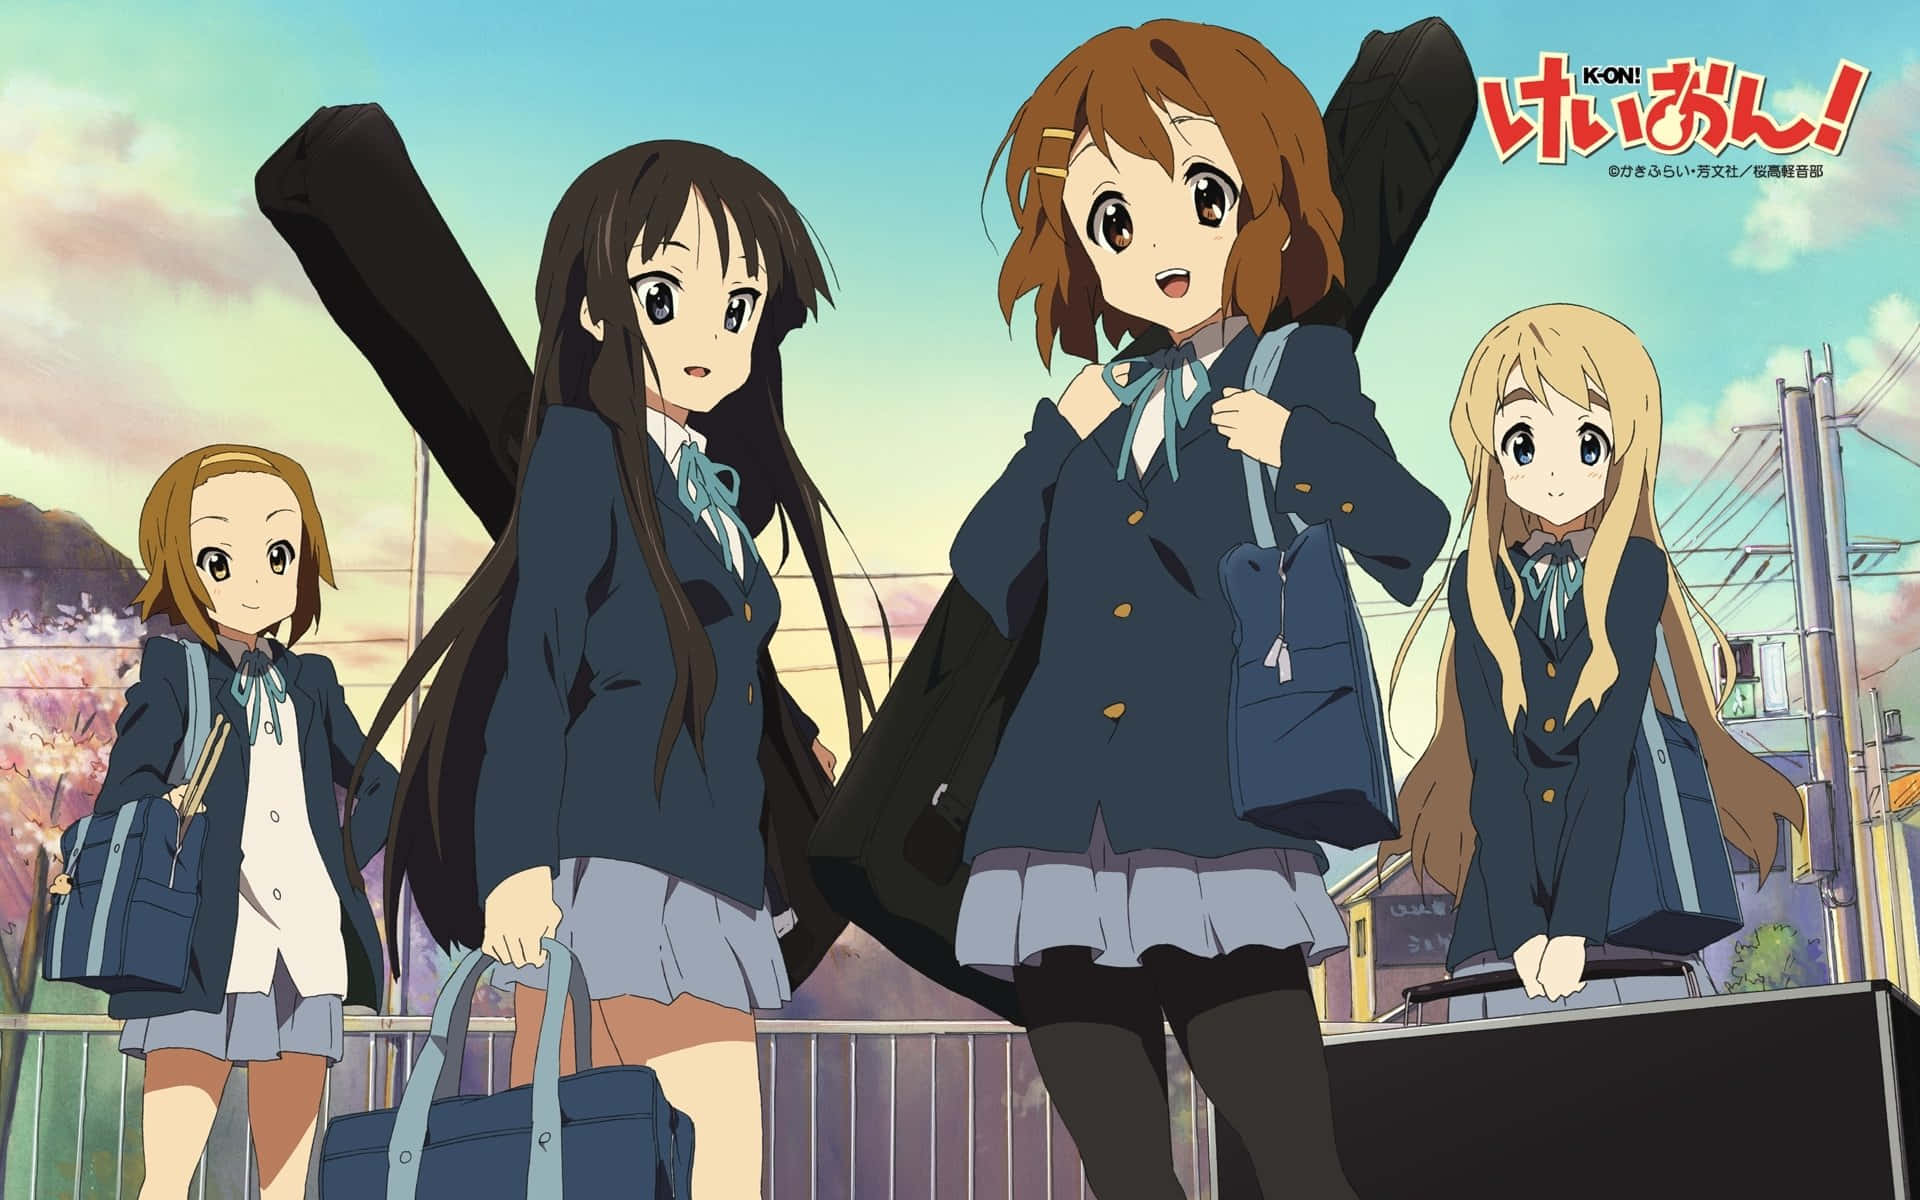 A Group Of Girls In School Uniforms Standing Next To Luggage